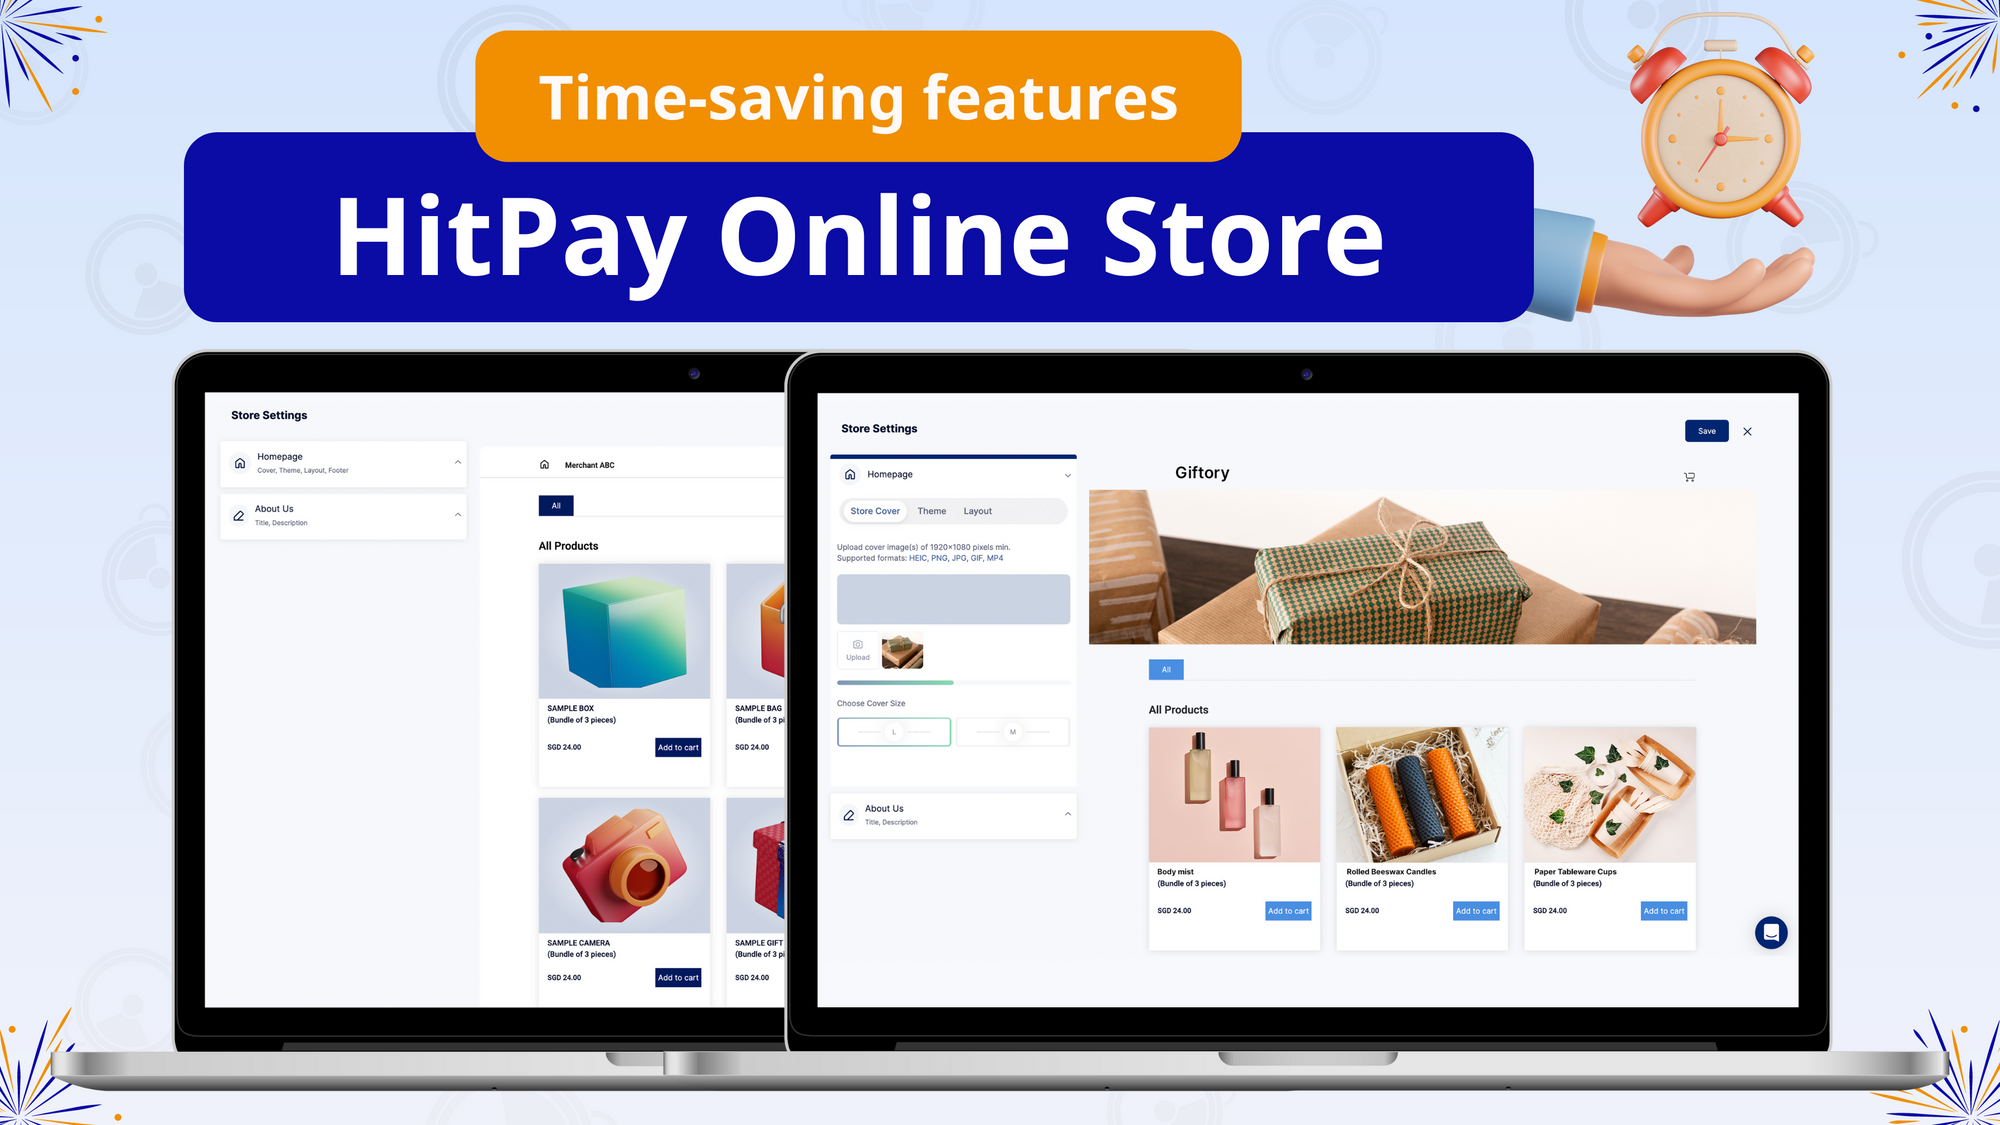 New time-saving features on the HitPay Online Store